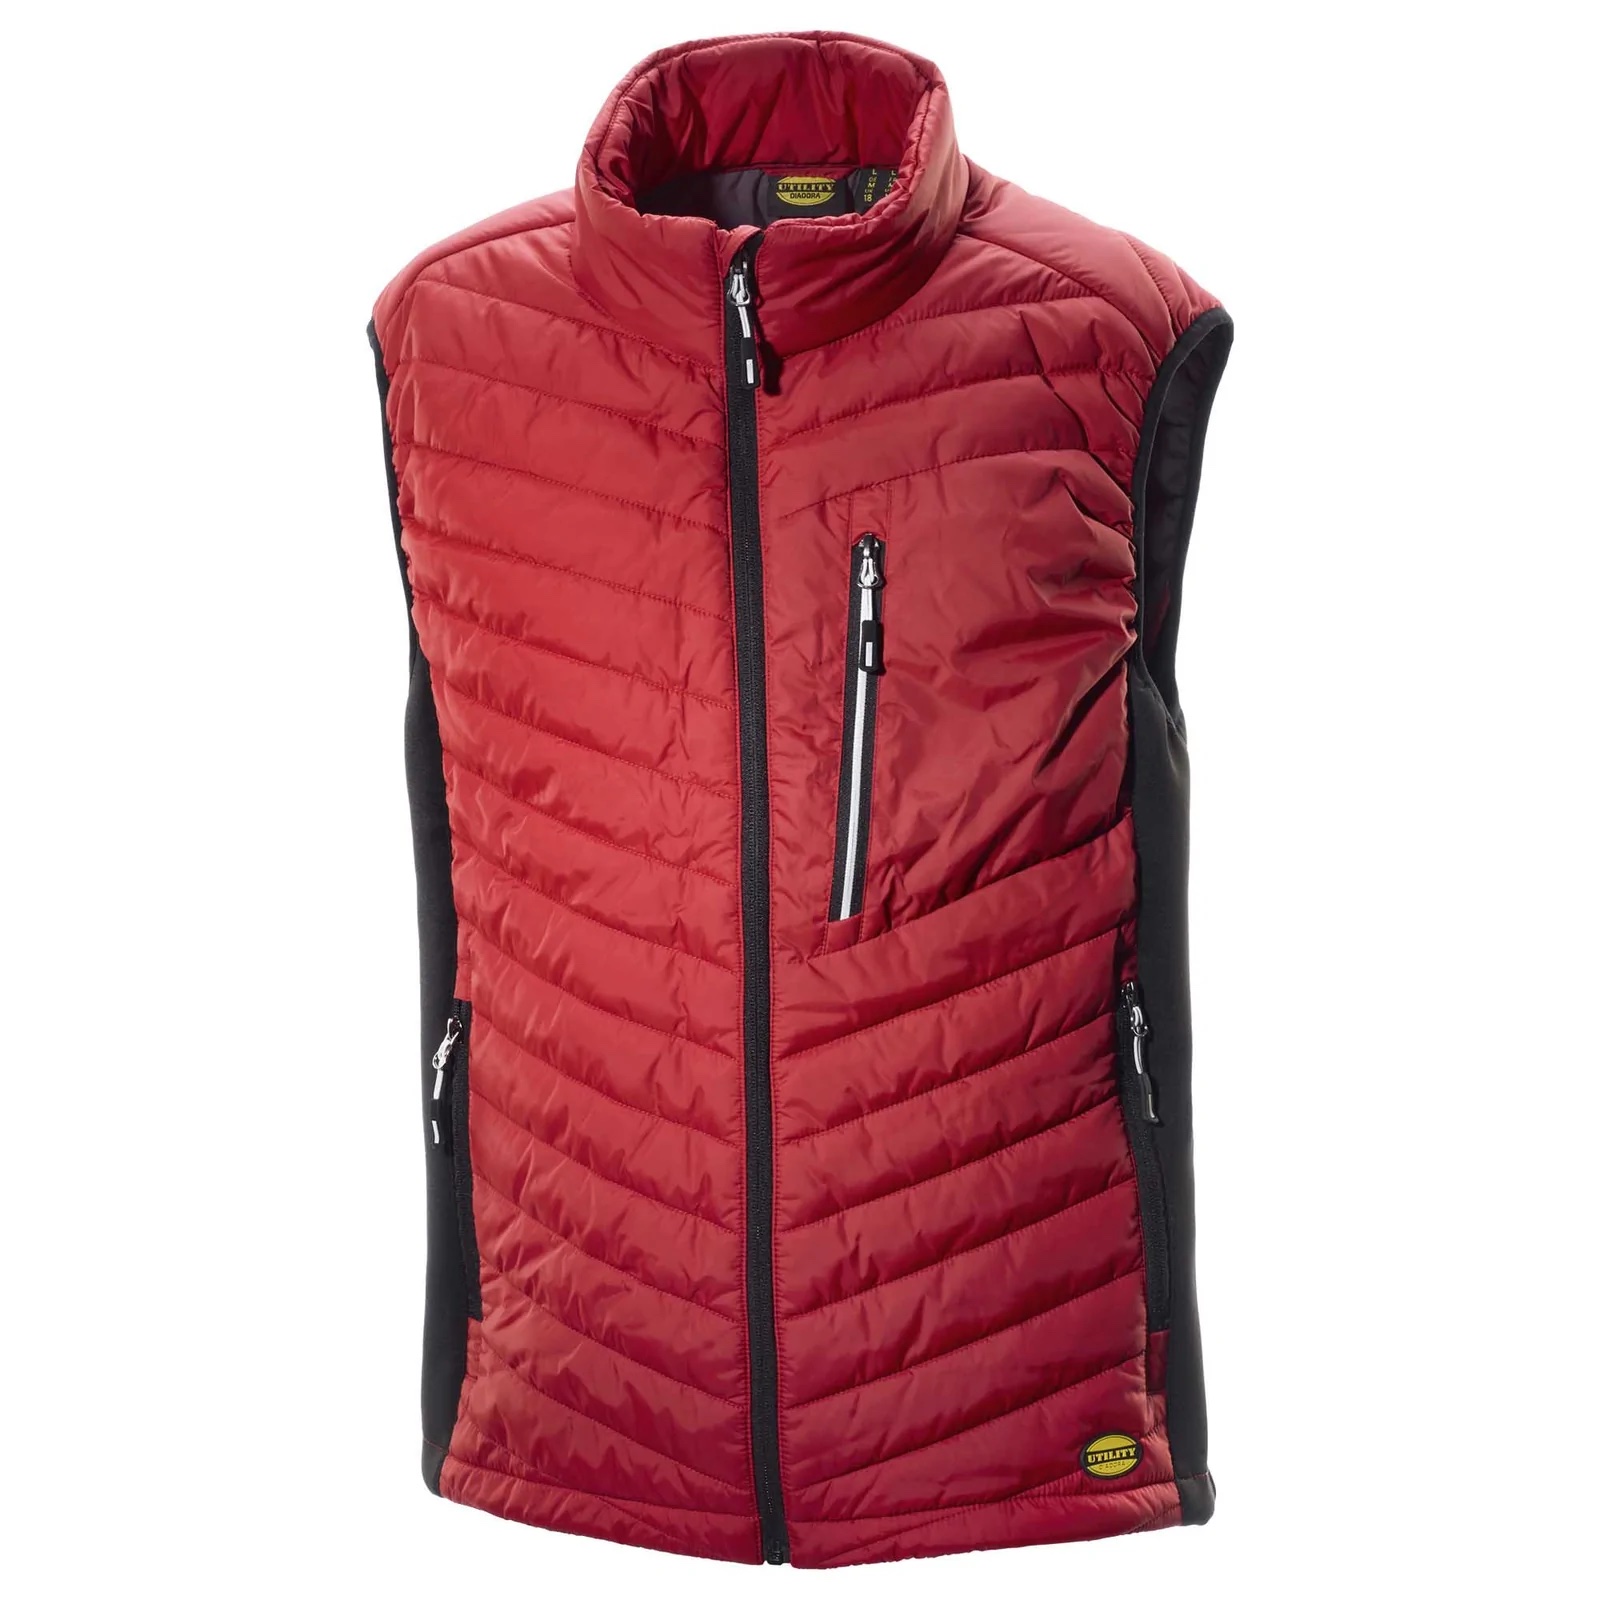 gilet-sans-manches-oslo-rouge-samba-taille-l